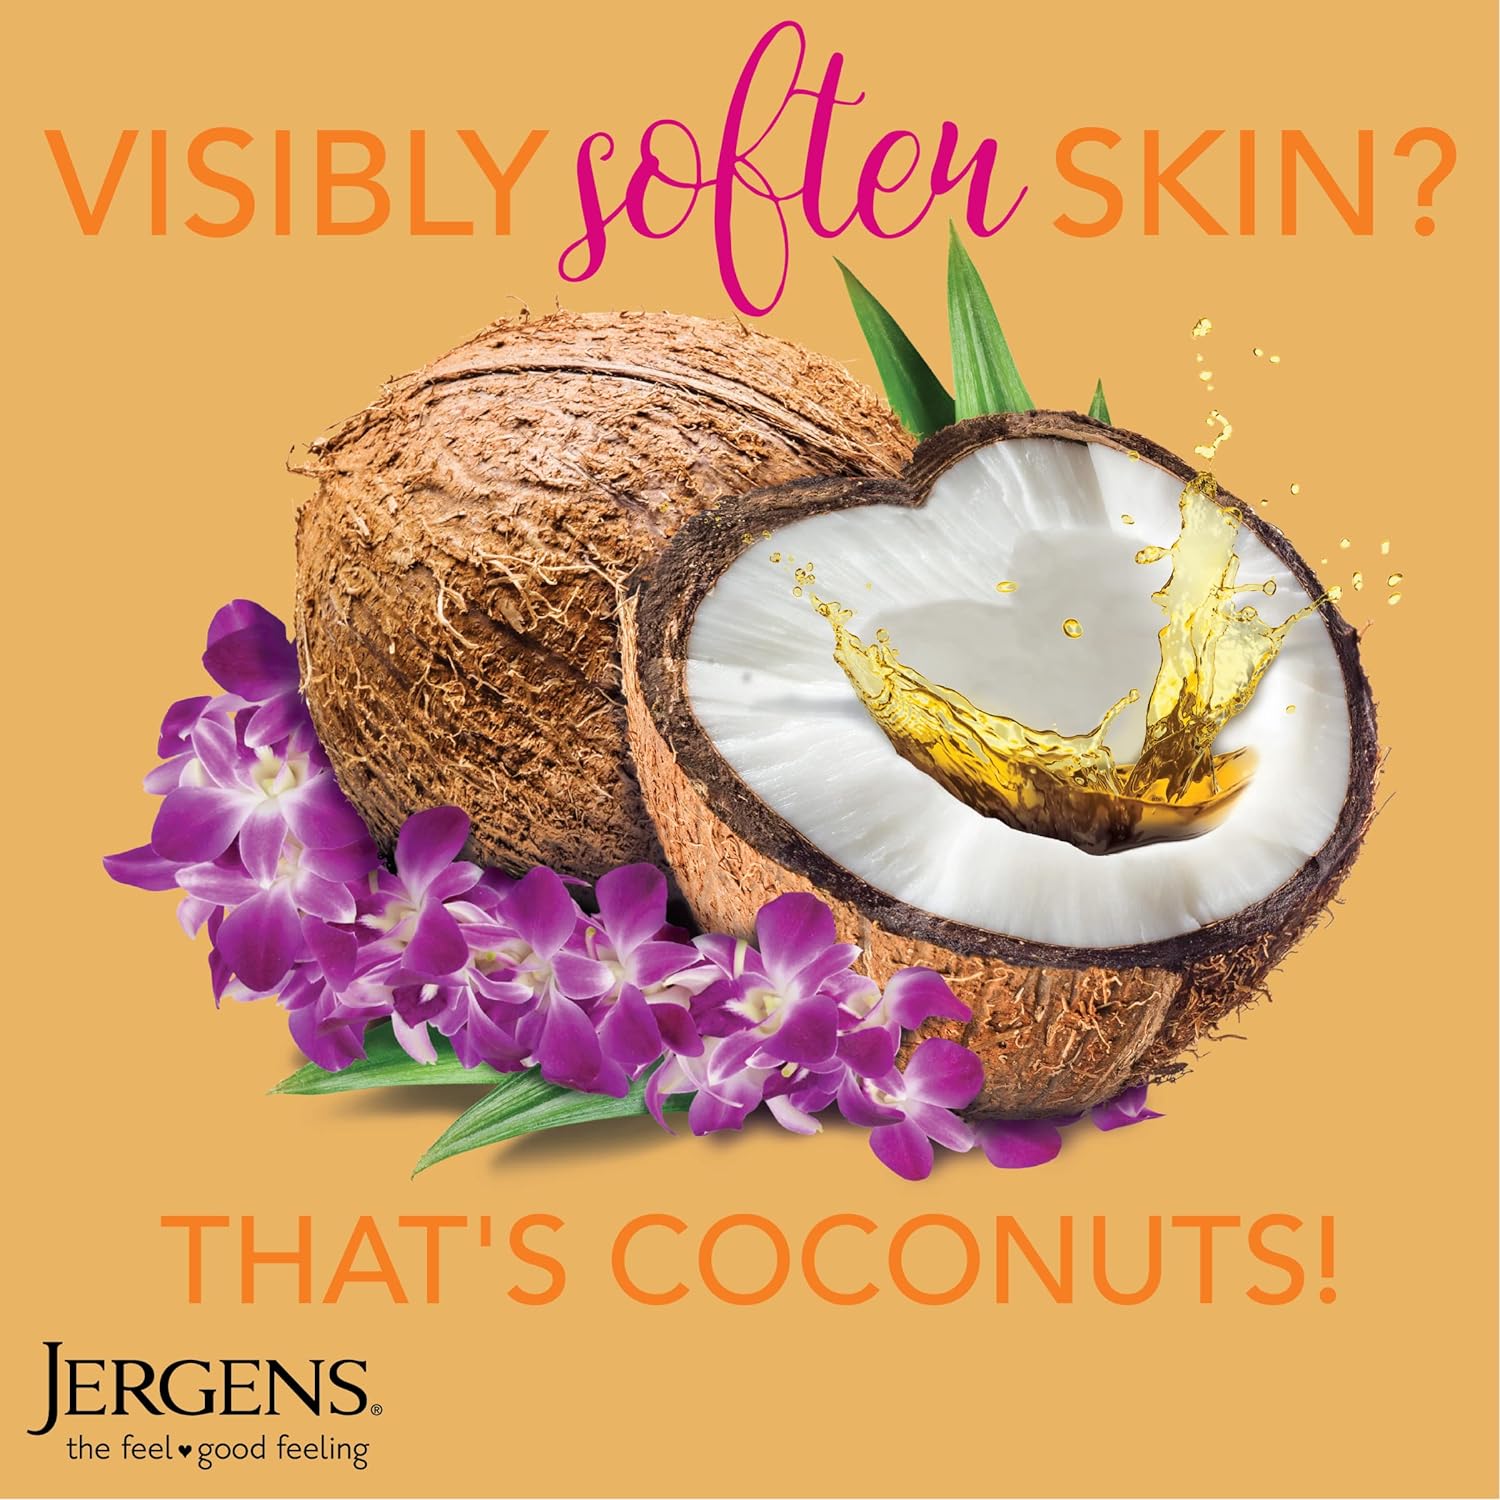 Jergens Hydrating Coconut Body Lotion, Hand and Body Moisturizer Hydrates Dry Skin Instantly, Infused with Coconut Oil, Dermatologist Tested, 16.8 oz : Everything Else